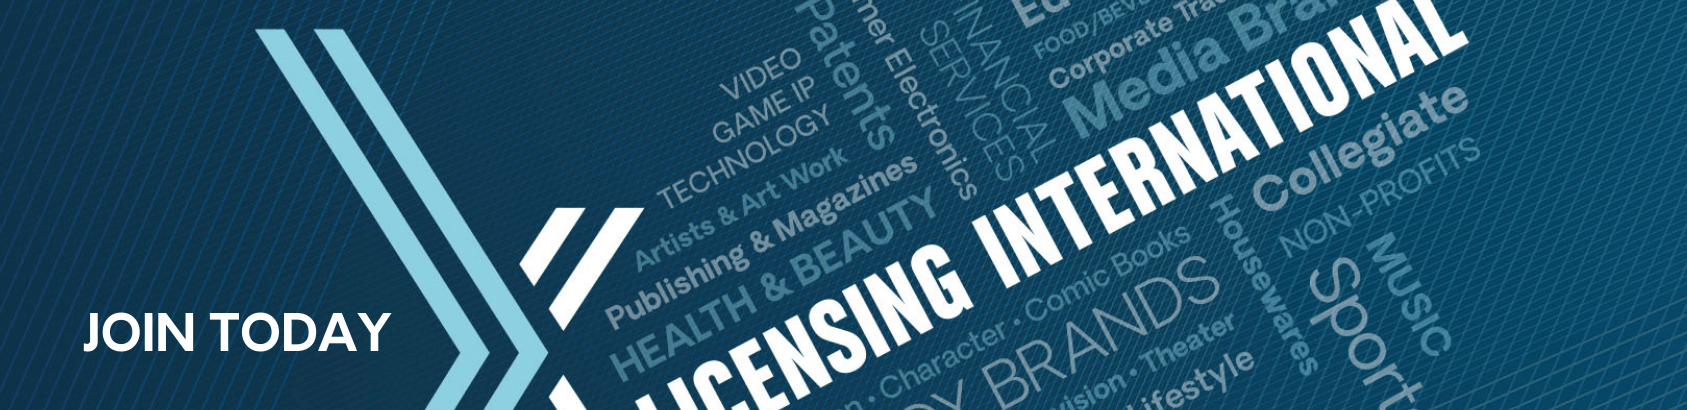 Welcome to LicensingInternational.org